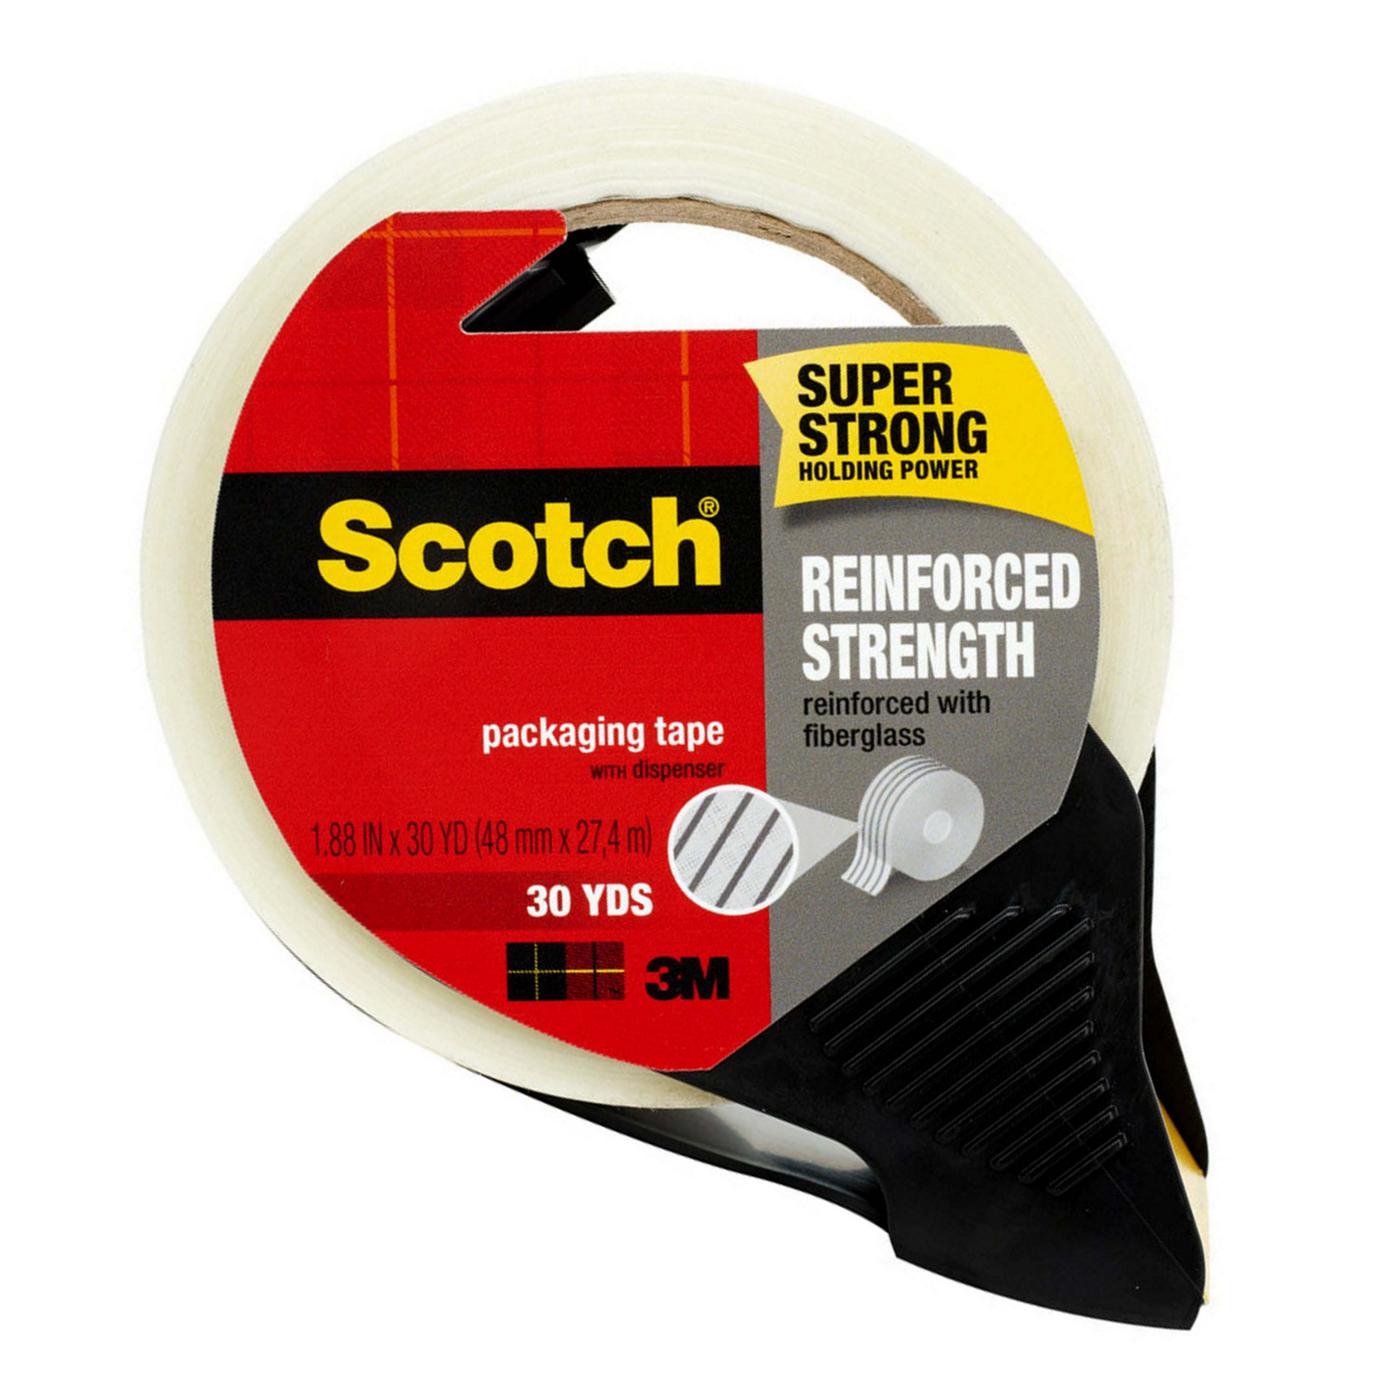 Scotch Packaging Tape with Dispenser; image 1 of 2